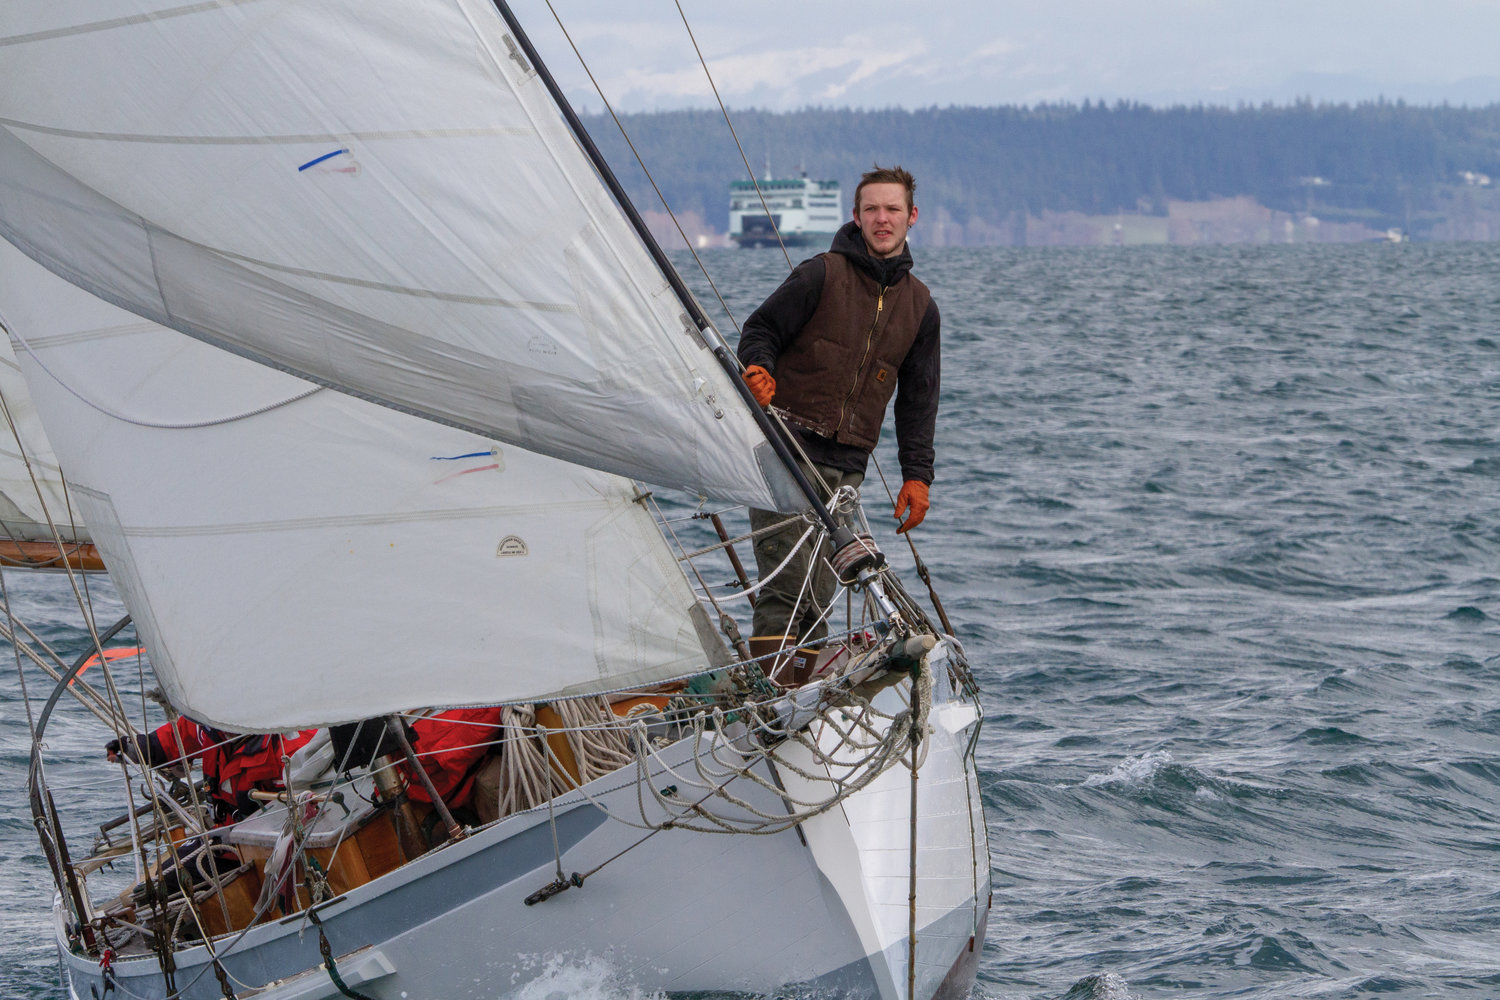 Chad Hedlund, a student at the Northwest School of Wooden Boat Building, sails for the first time with Bertram Levy on his boat Able.